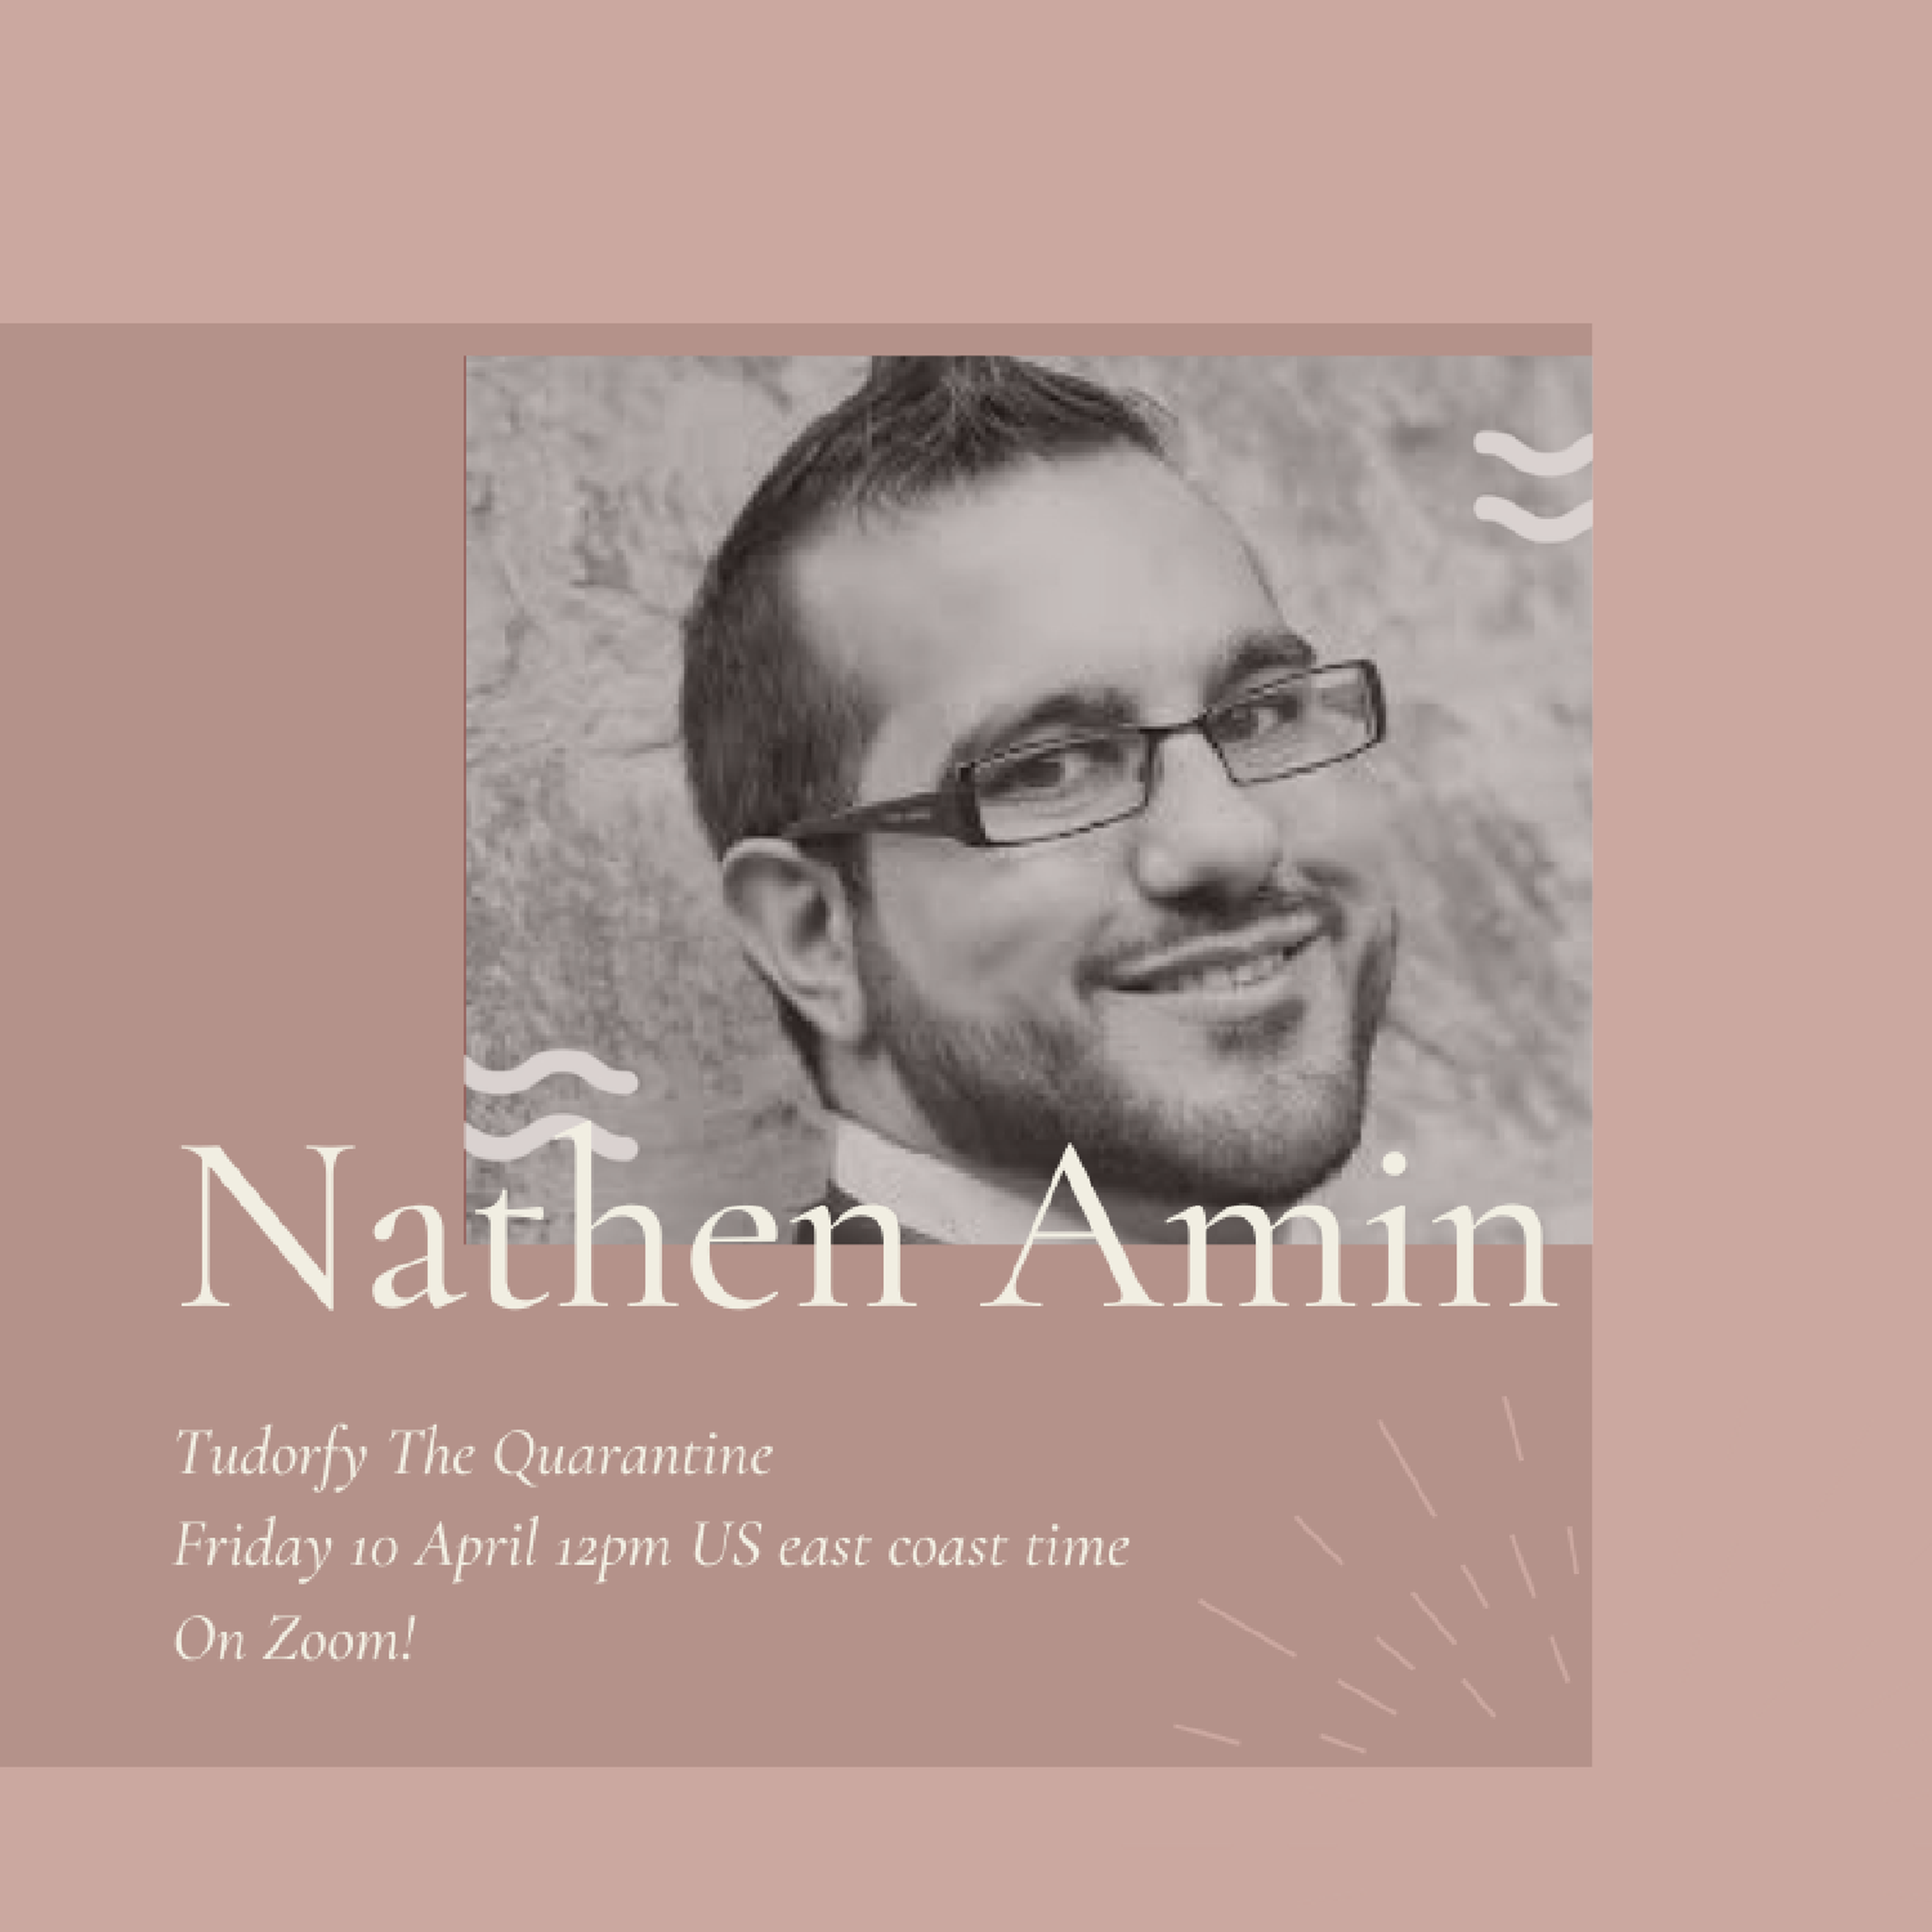 Supplemental: Nathen Amin and the House of Beaufort